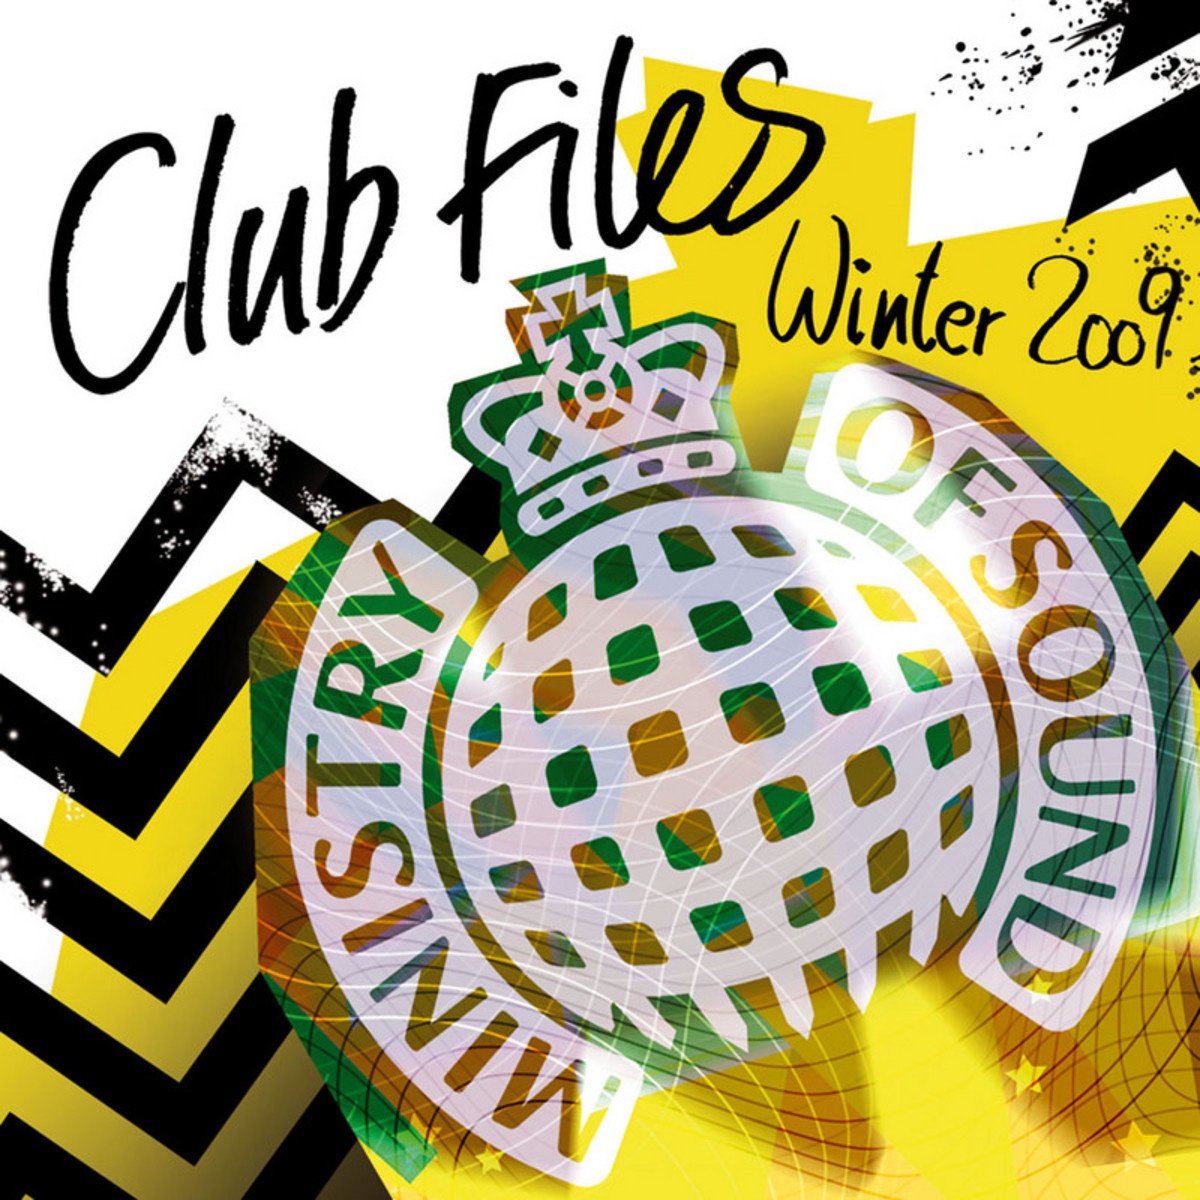 Ministry of Sound - Club Files Winter 2009